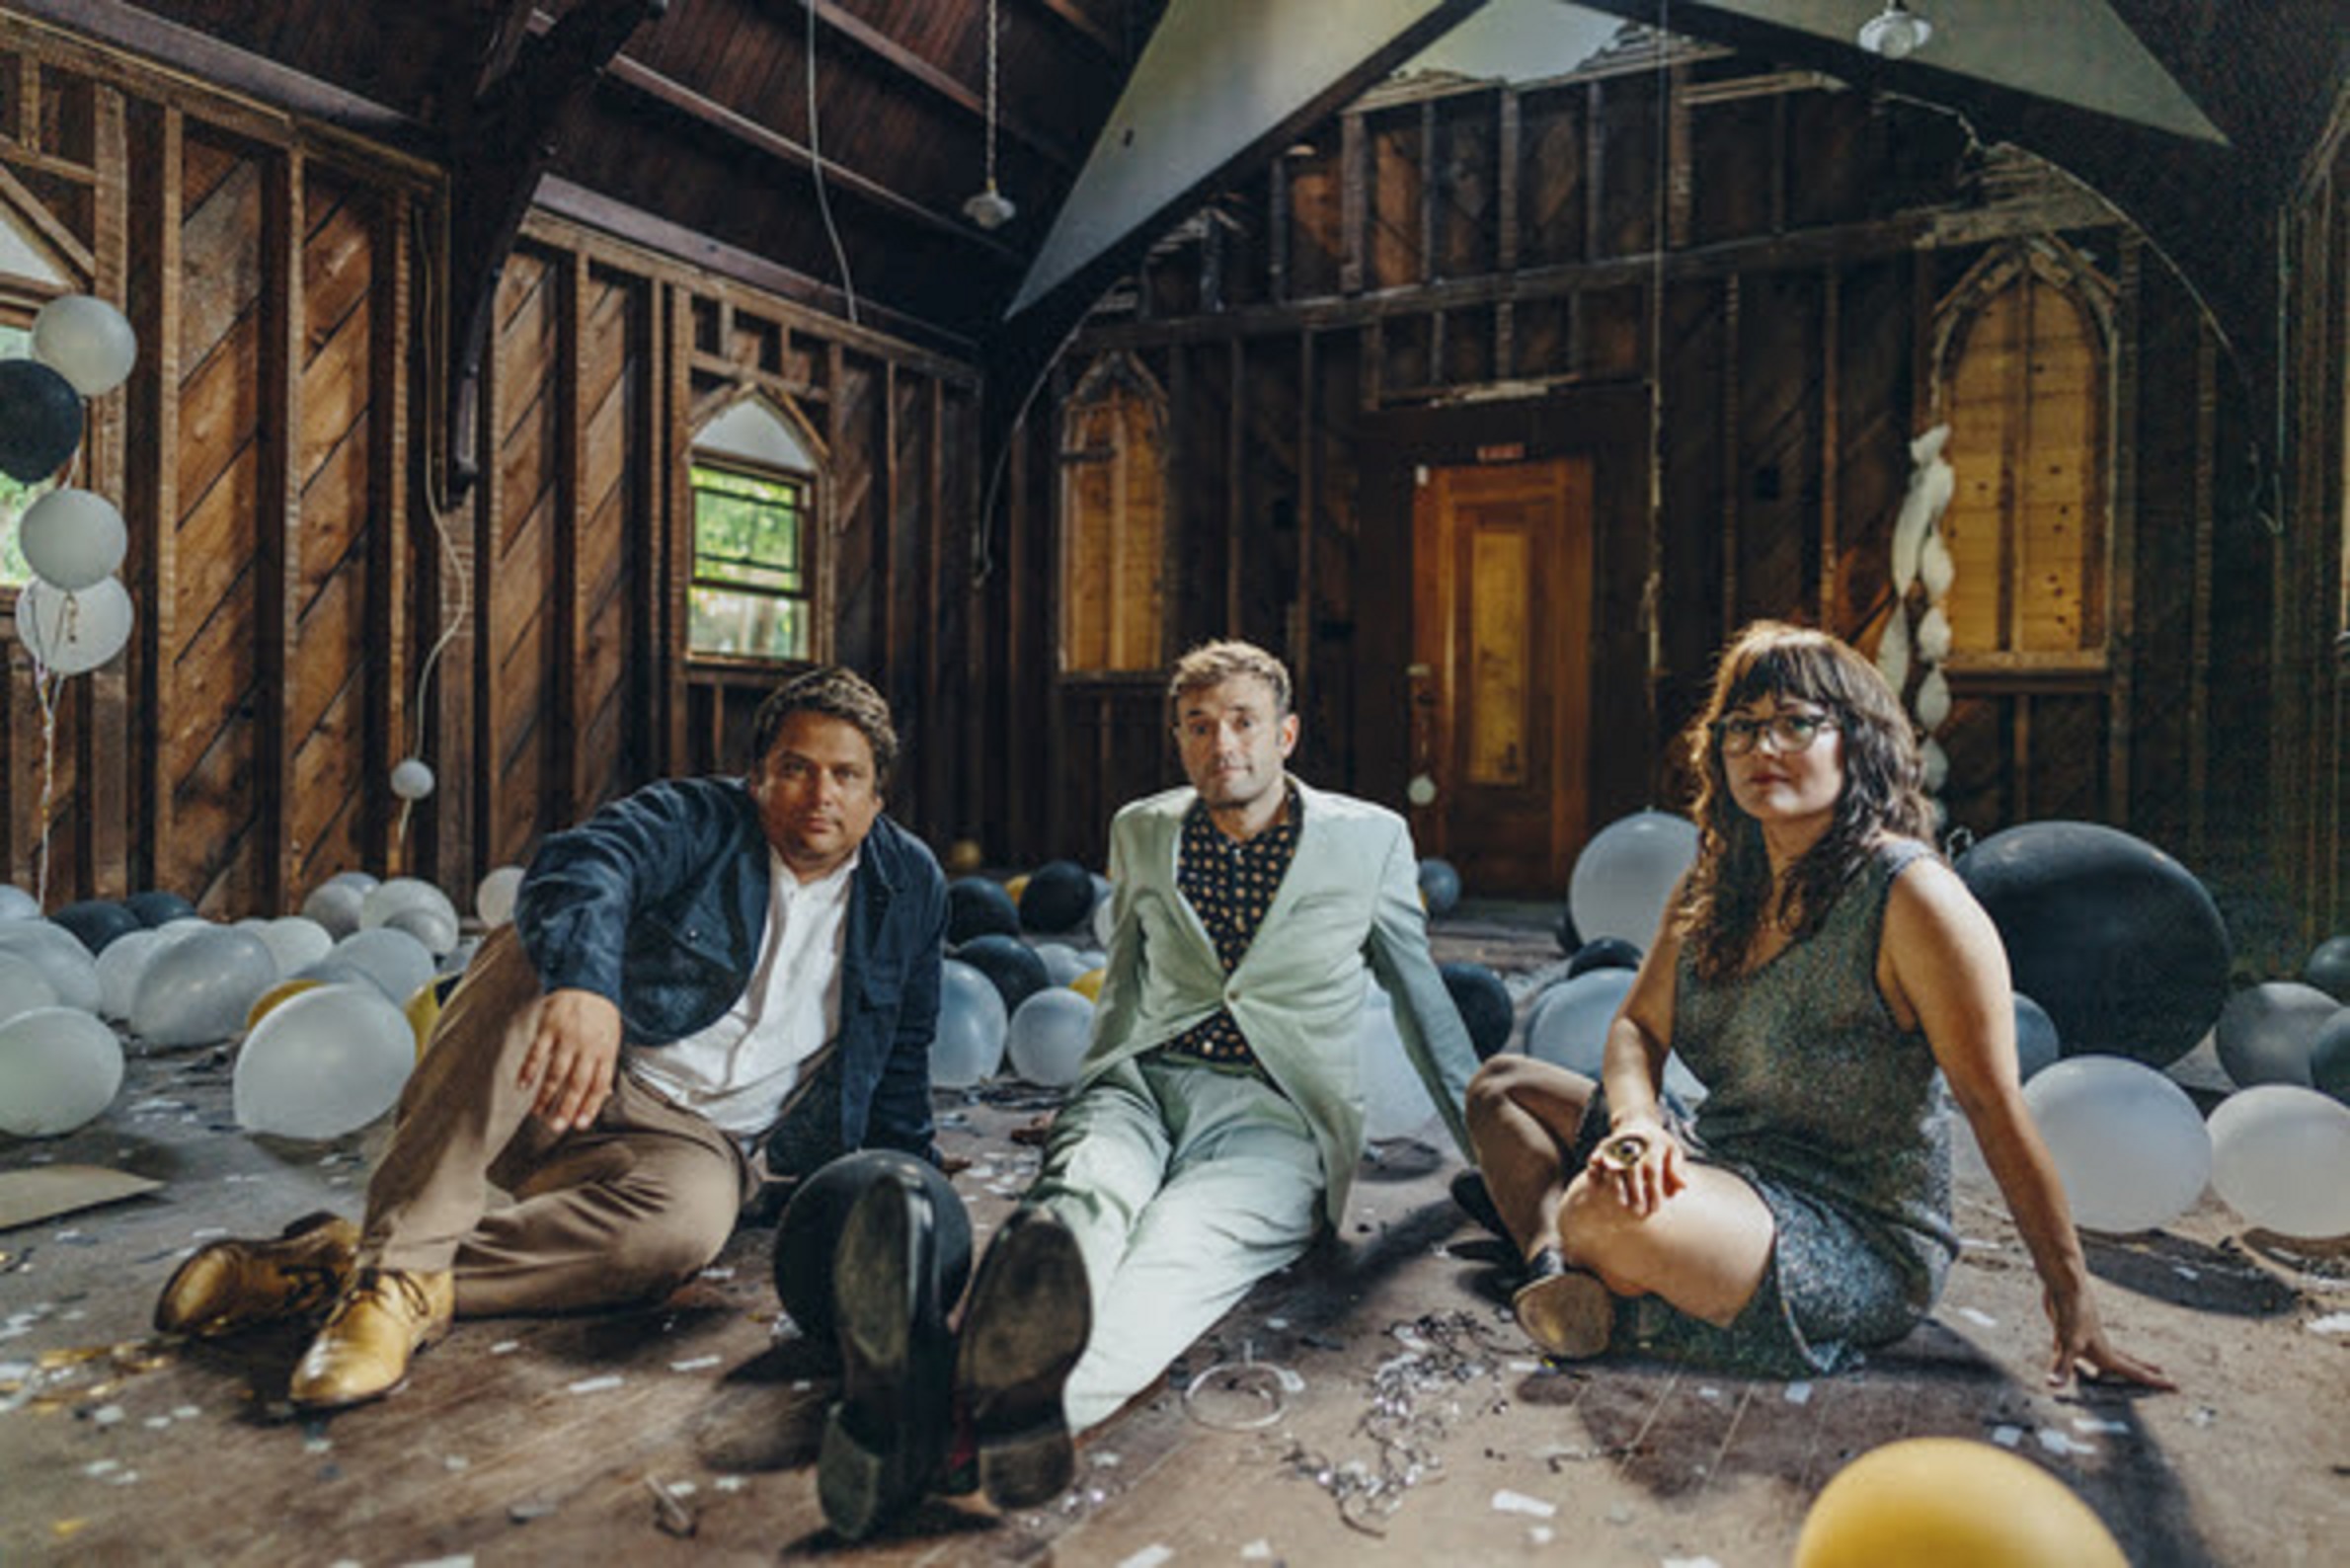 Nickel Creek’s new song “Where the Long Line Leads” debuts today